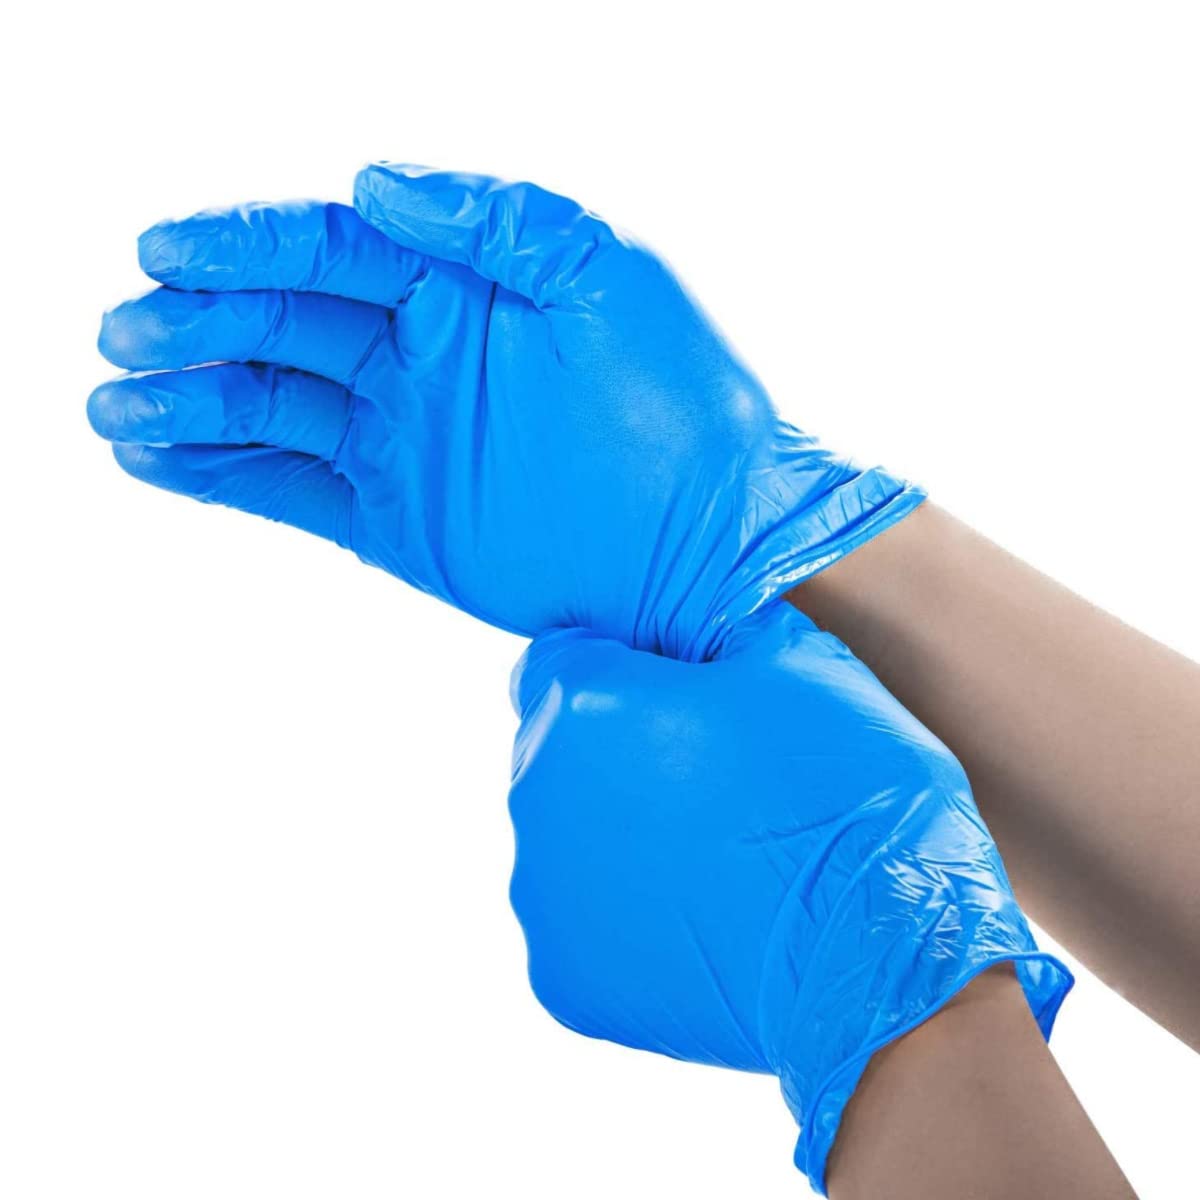 Jointown Basic Medical Synmax Vinyl Exam Gloves - Latex-Free & Powder-Free - Small, BMPF-3001(Small (Pack of 1000))